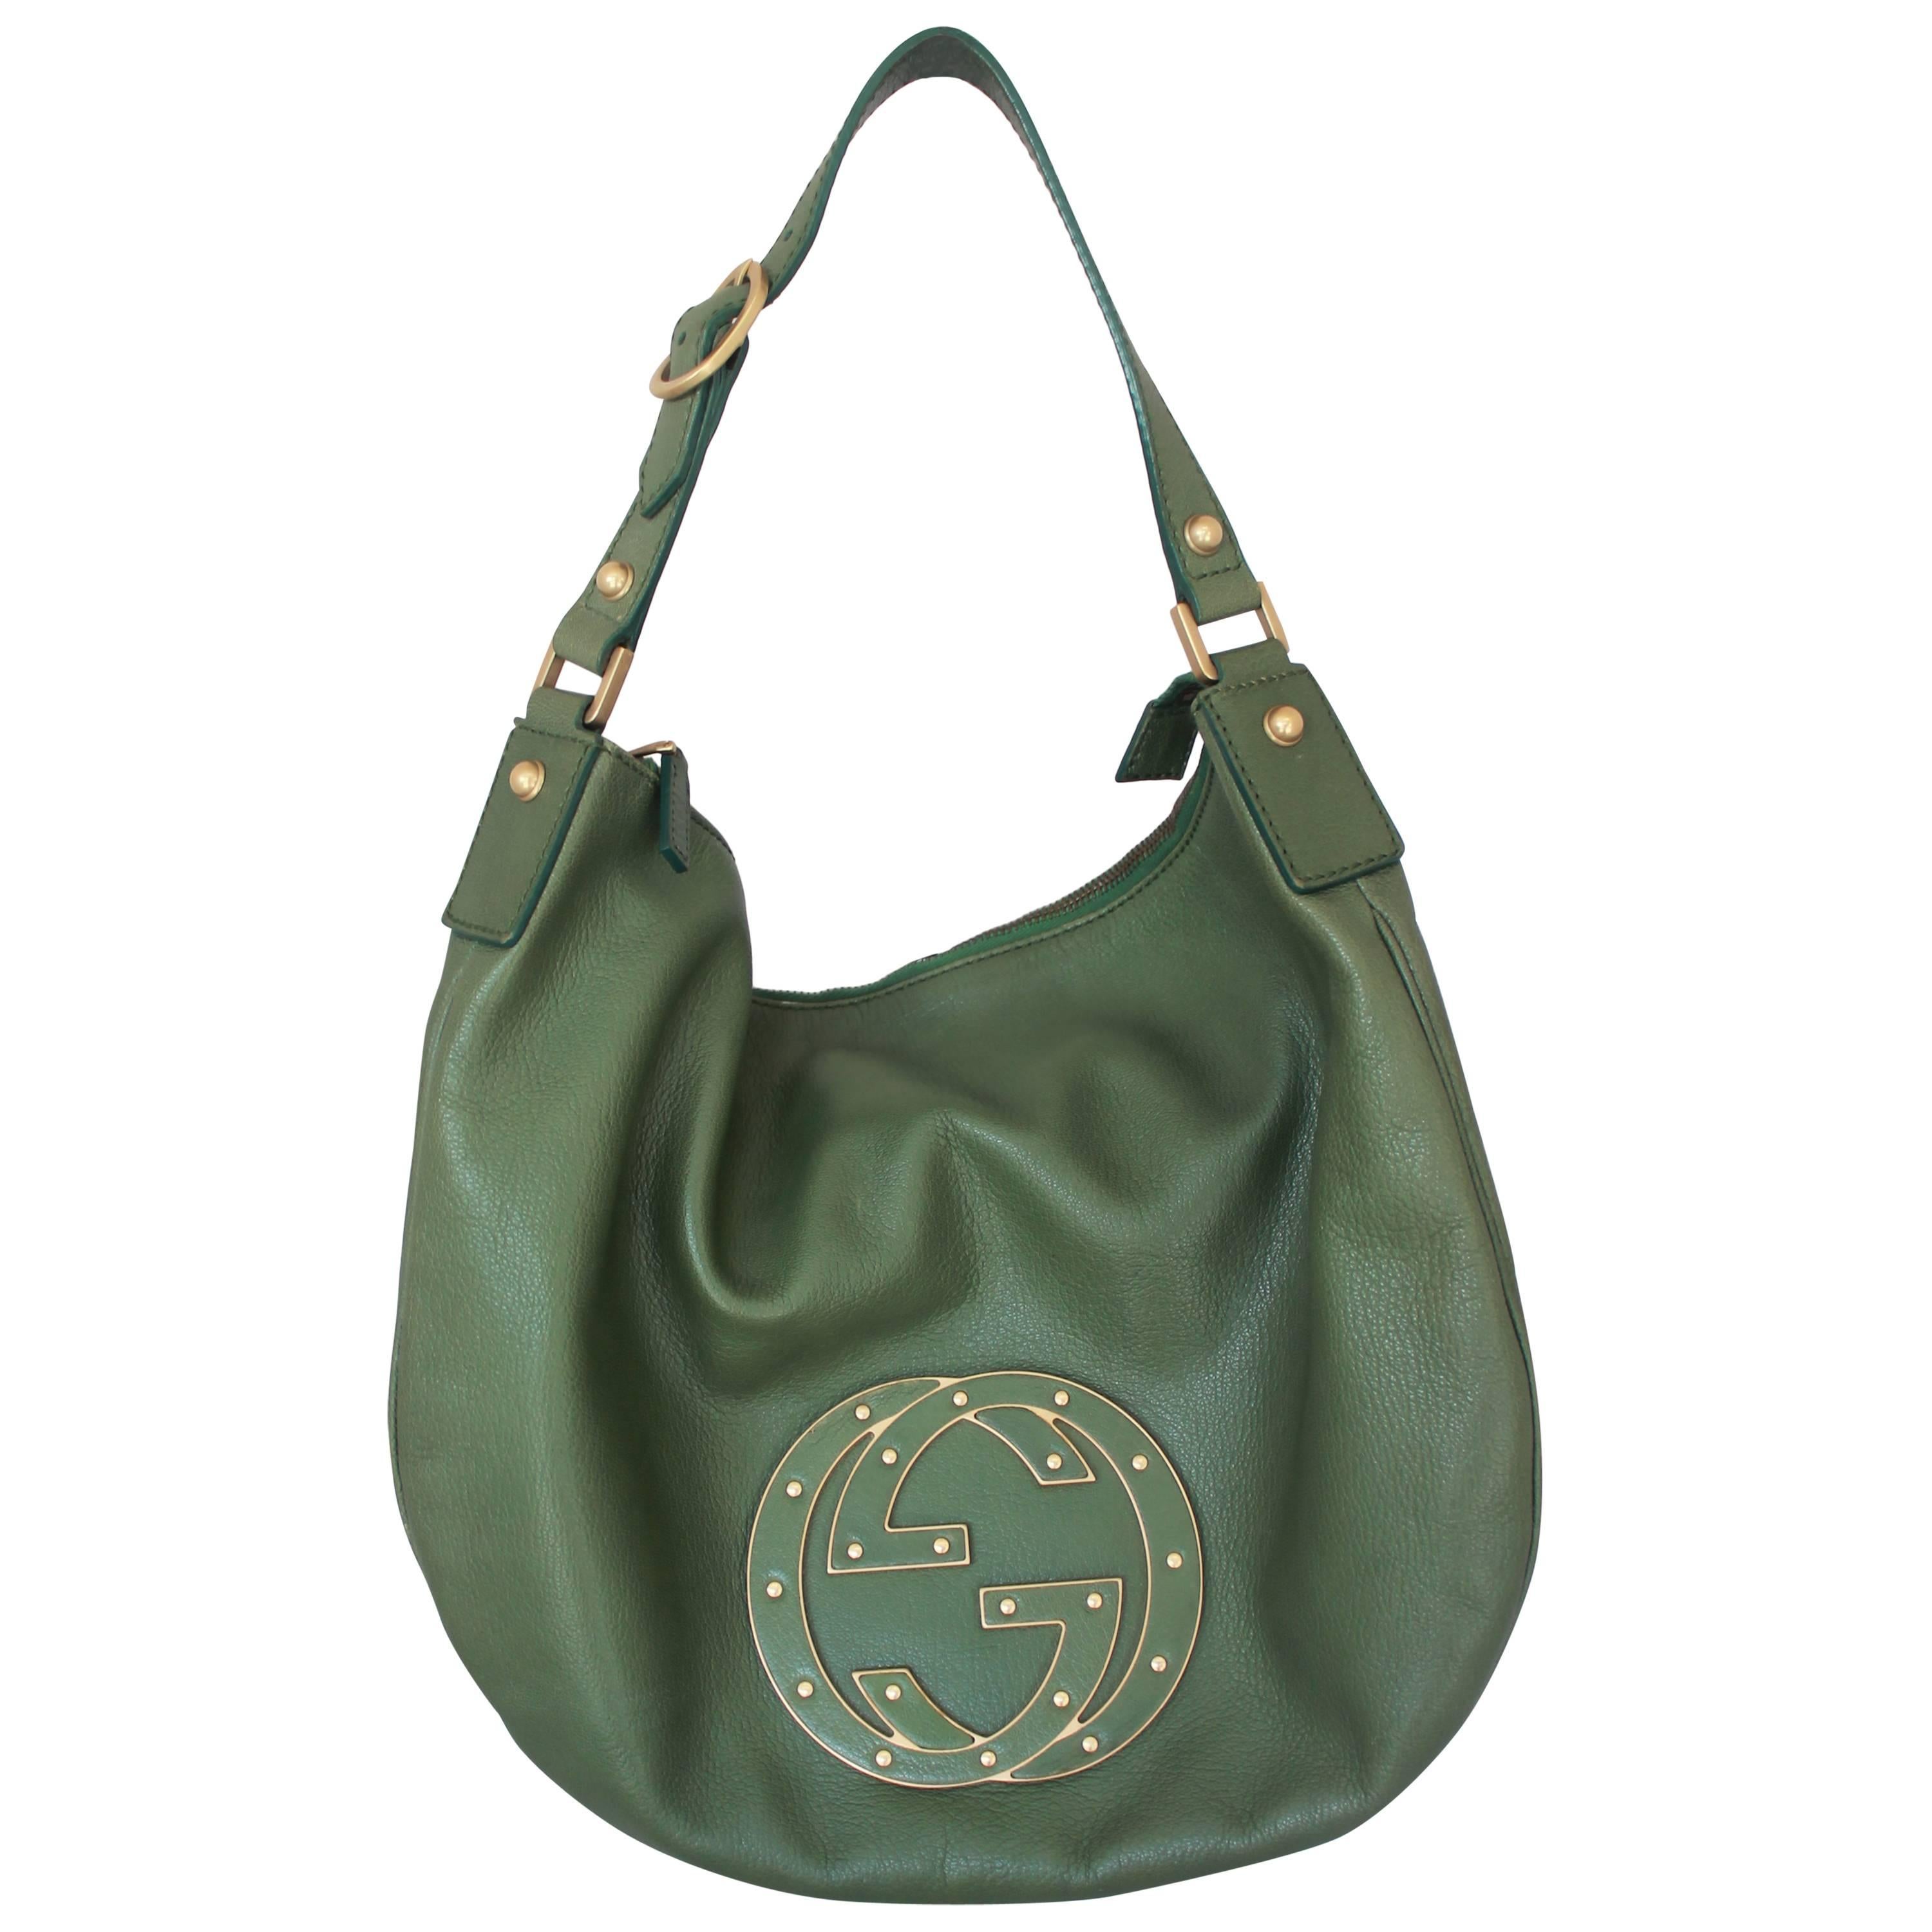 Tom Ford for Gucci Green Leather Hobo Shoulder Bag w/ Studs - GHW